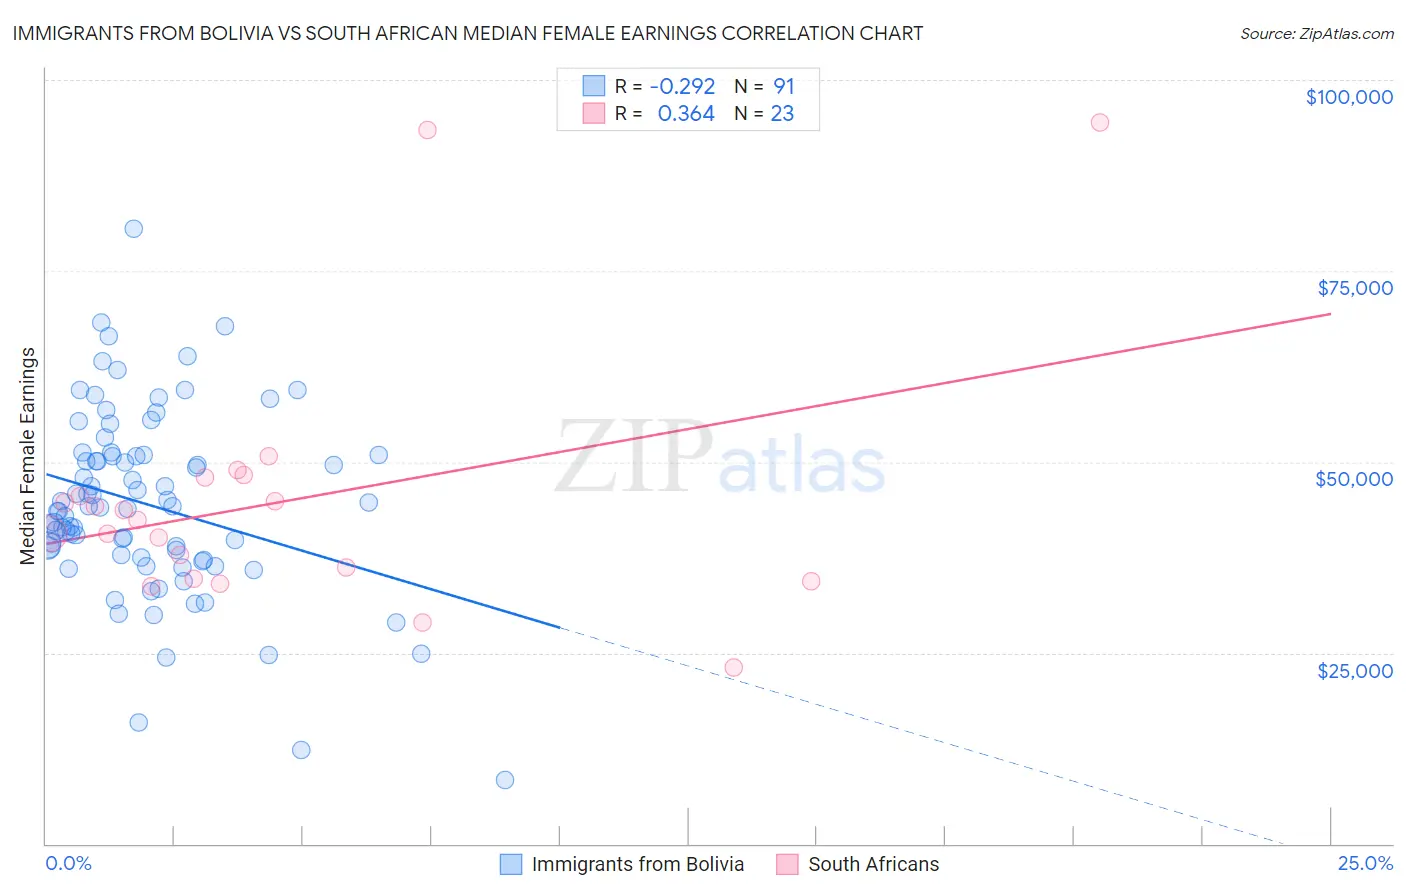 Immigrants from Bolivia vs South African Median Female Earnings